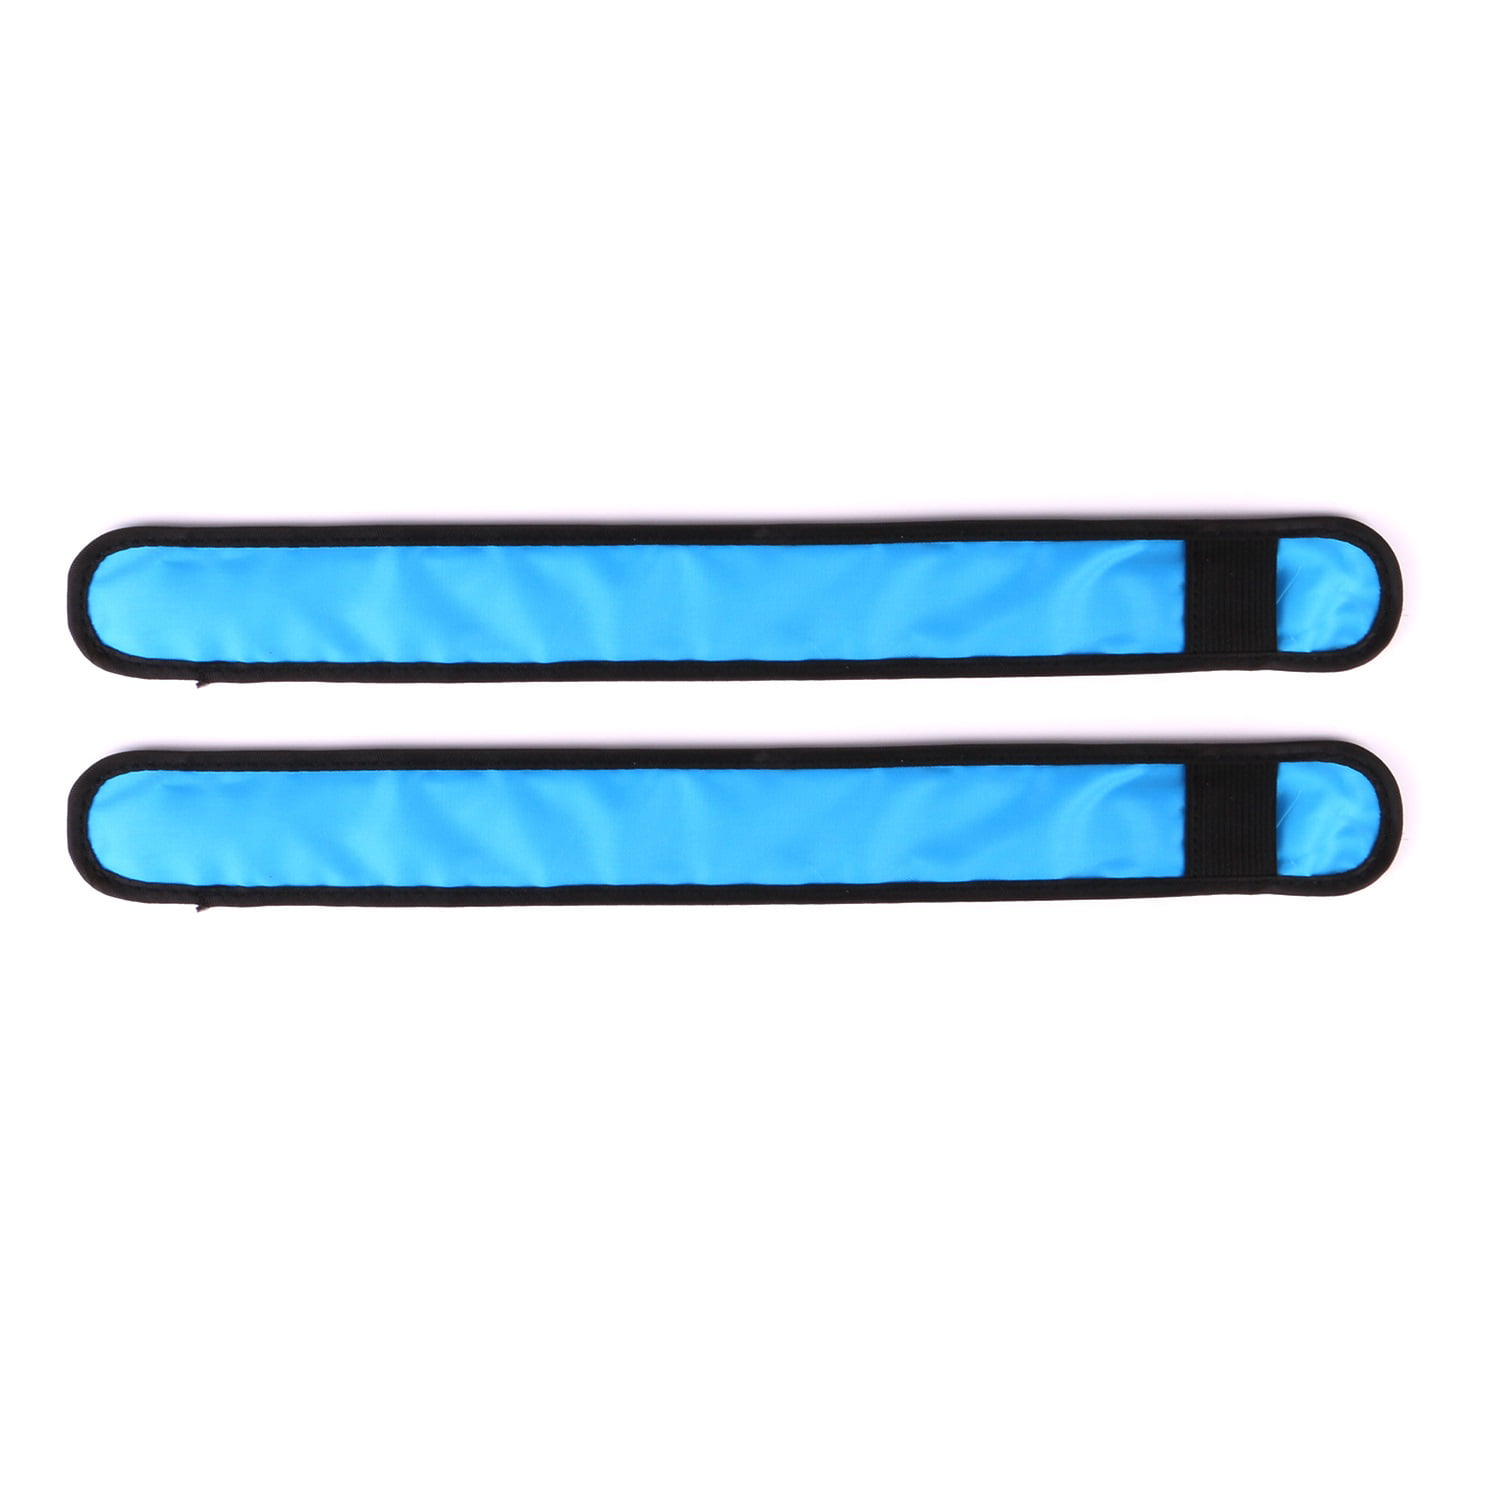 Details about   LED Light Up Armband Reflective Running Belt Strap Glow in The Dark For Cycling 